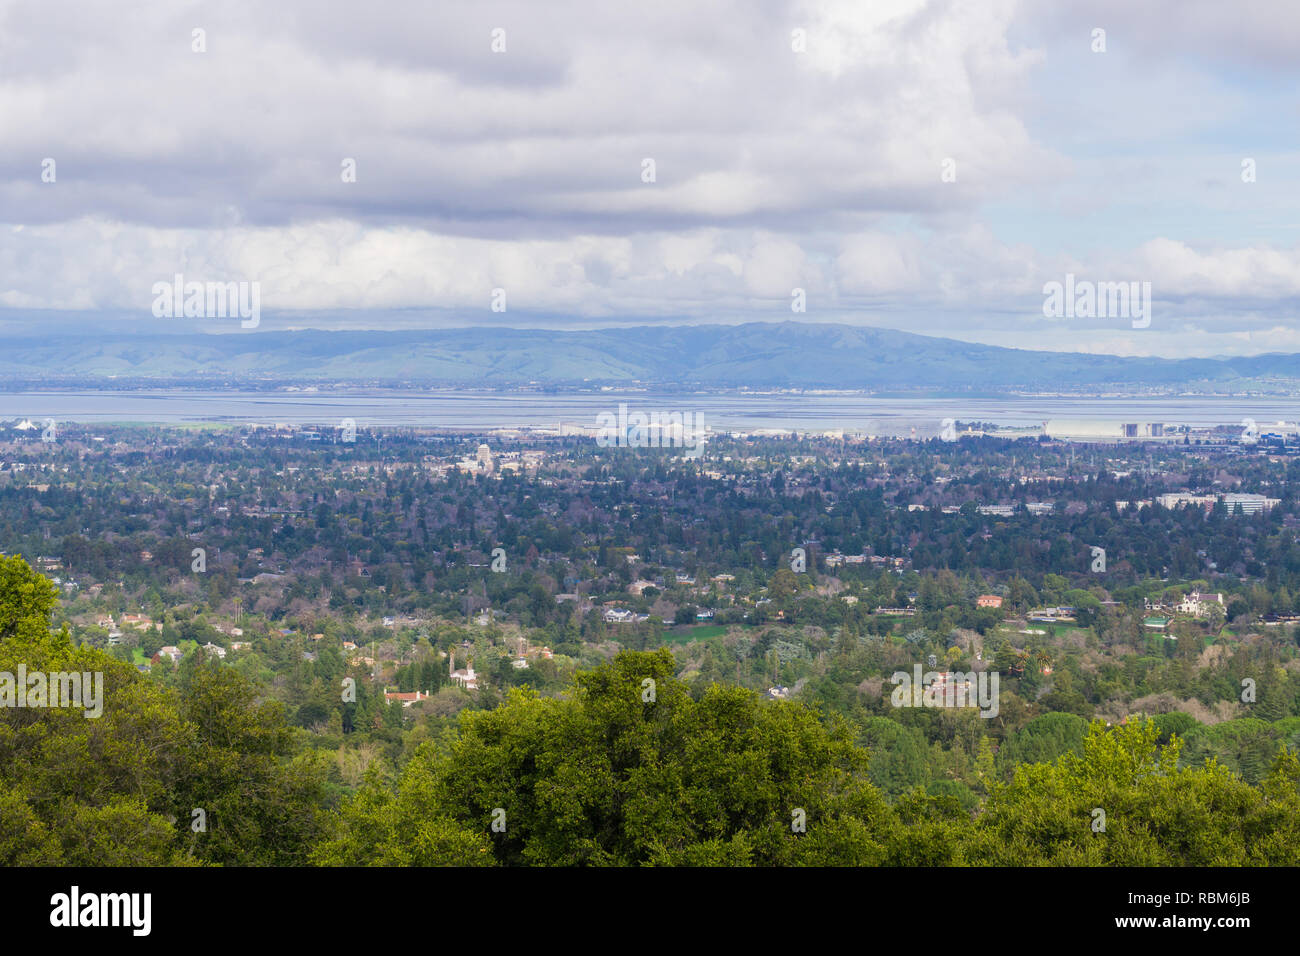 View towards Sunnyvale and Mountain View, Silicon Valley on a ...